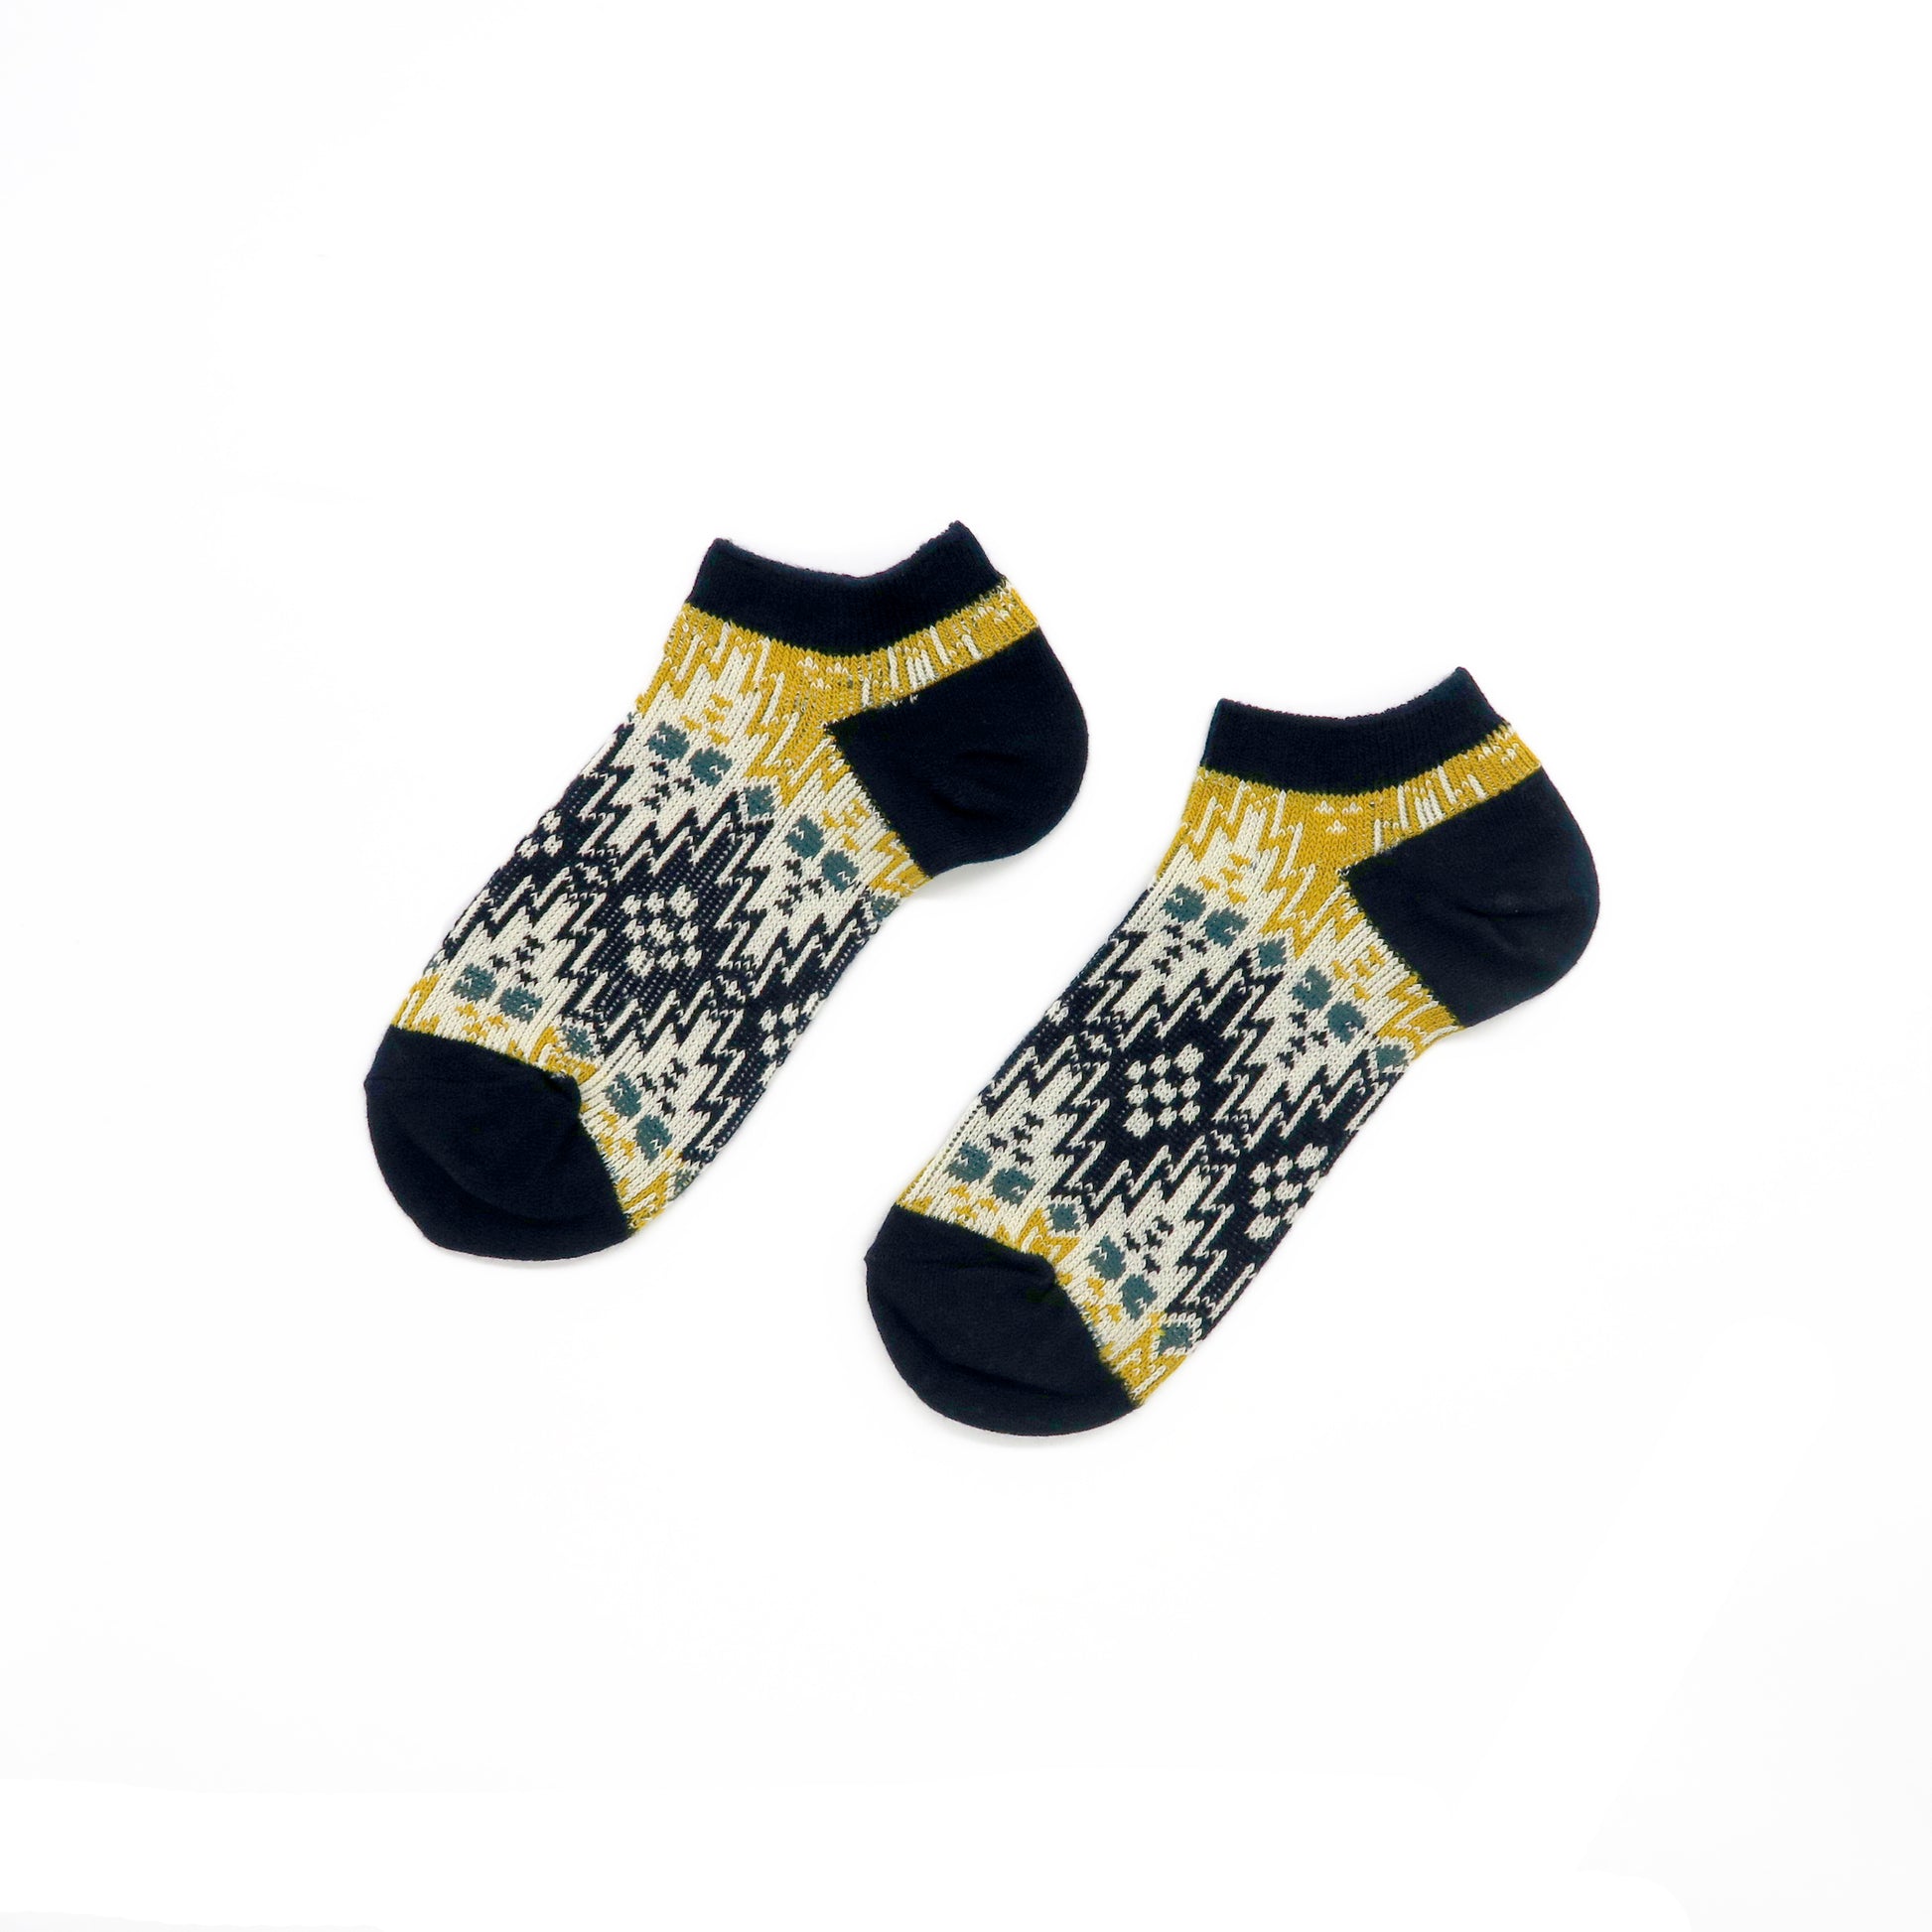 Maze pattern black and yellow color low sock